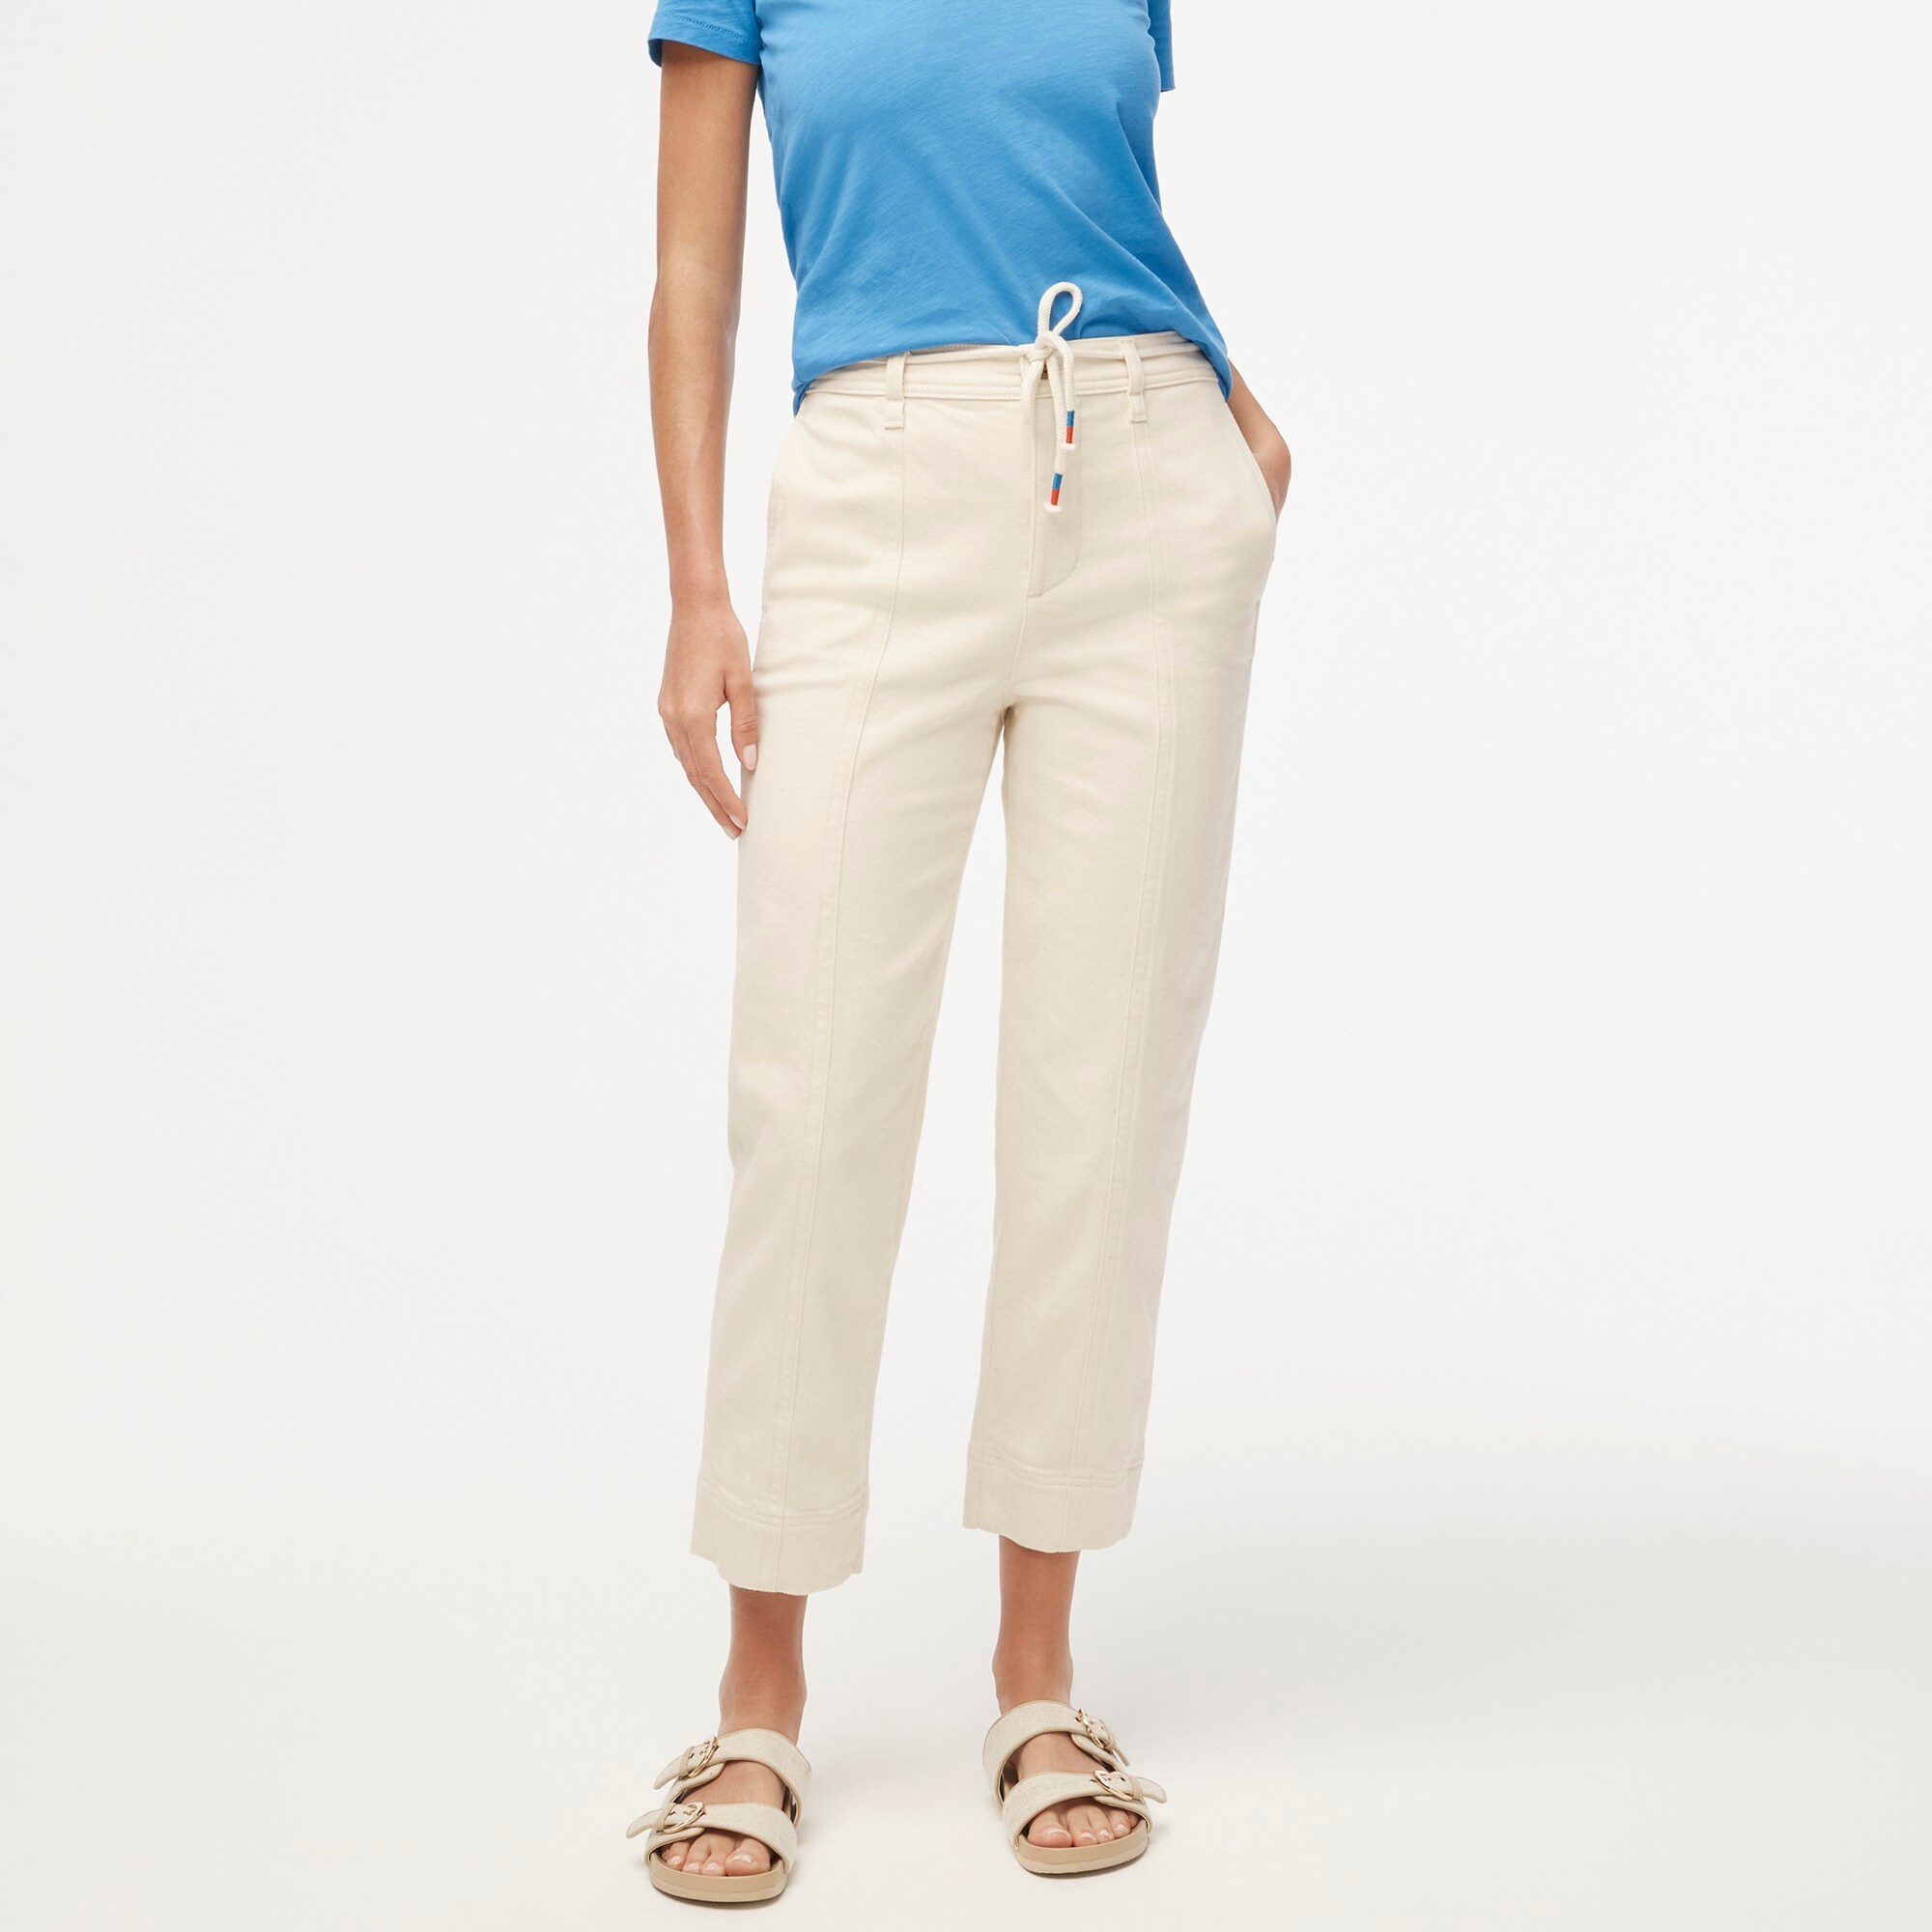 Jcrew Seamed straight-leg jean in all-day stretch with rope-tie waist